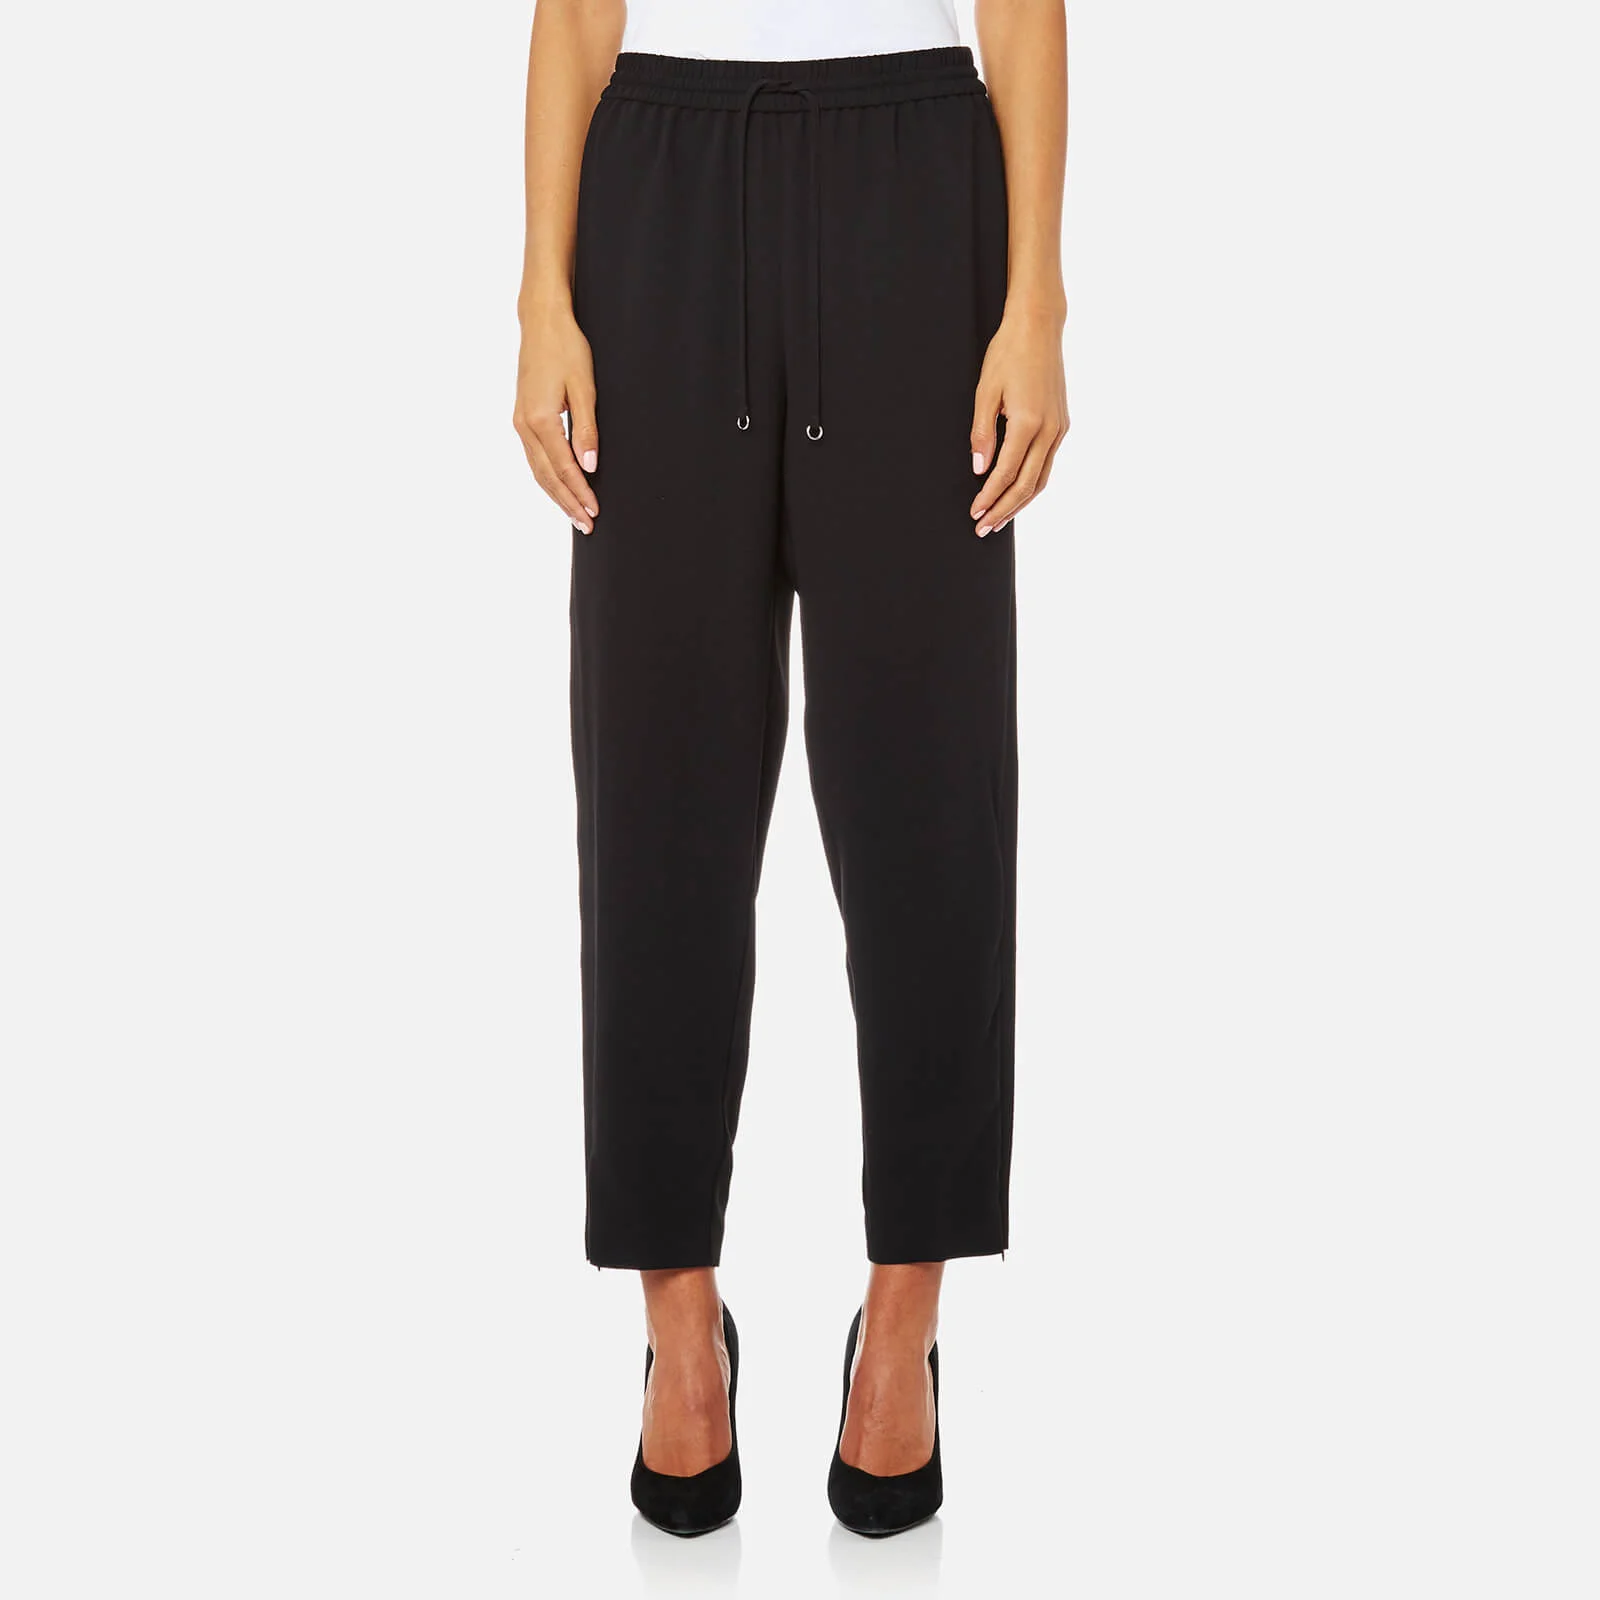 T by Alexander Wang Women's Satin Back Crepe Pull On Welded Pants - Black Image 1